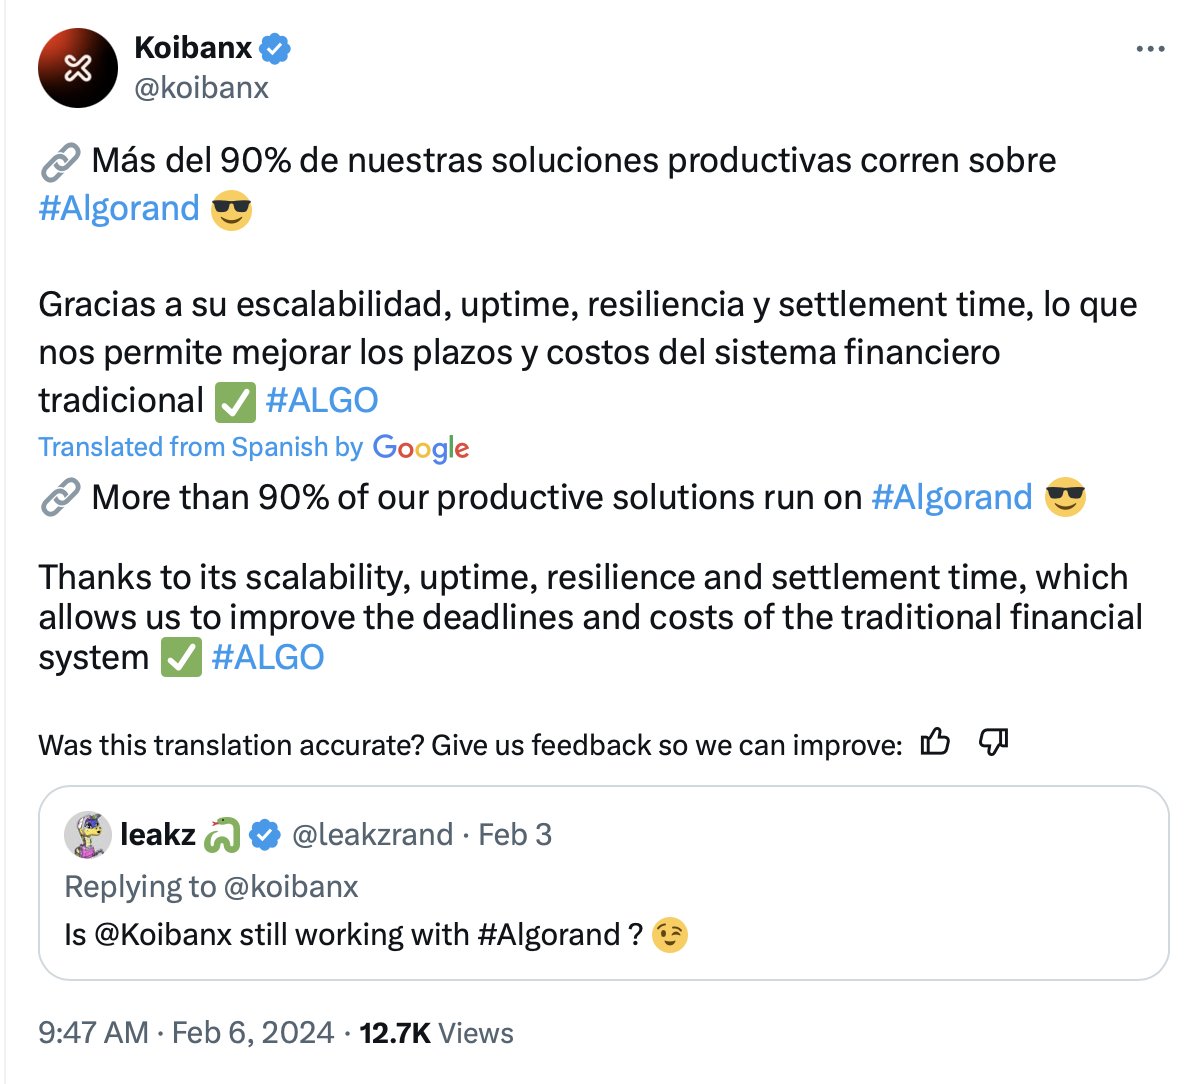 🔥 @koibanx is reinventing the Latam payments infrastructure with Web3, and more than 90% of their solutions are expected to run on @Algorand. 🔥